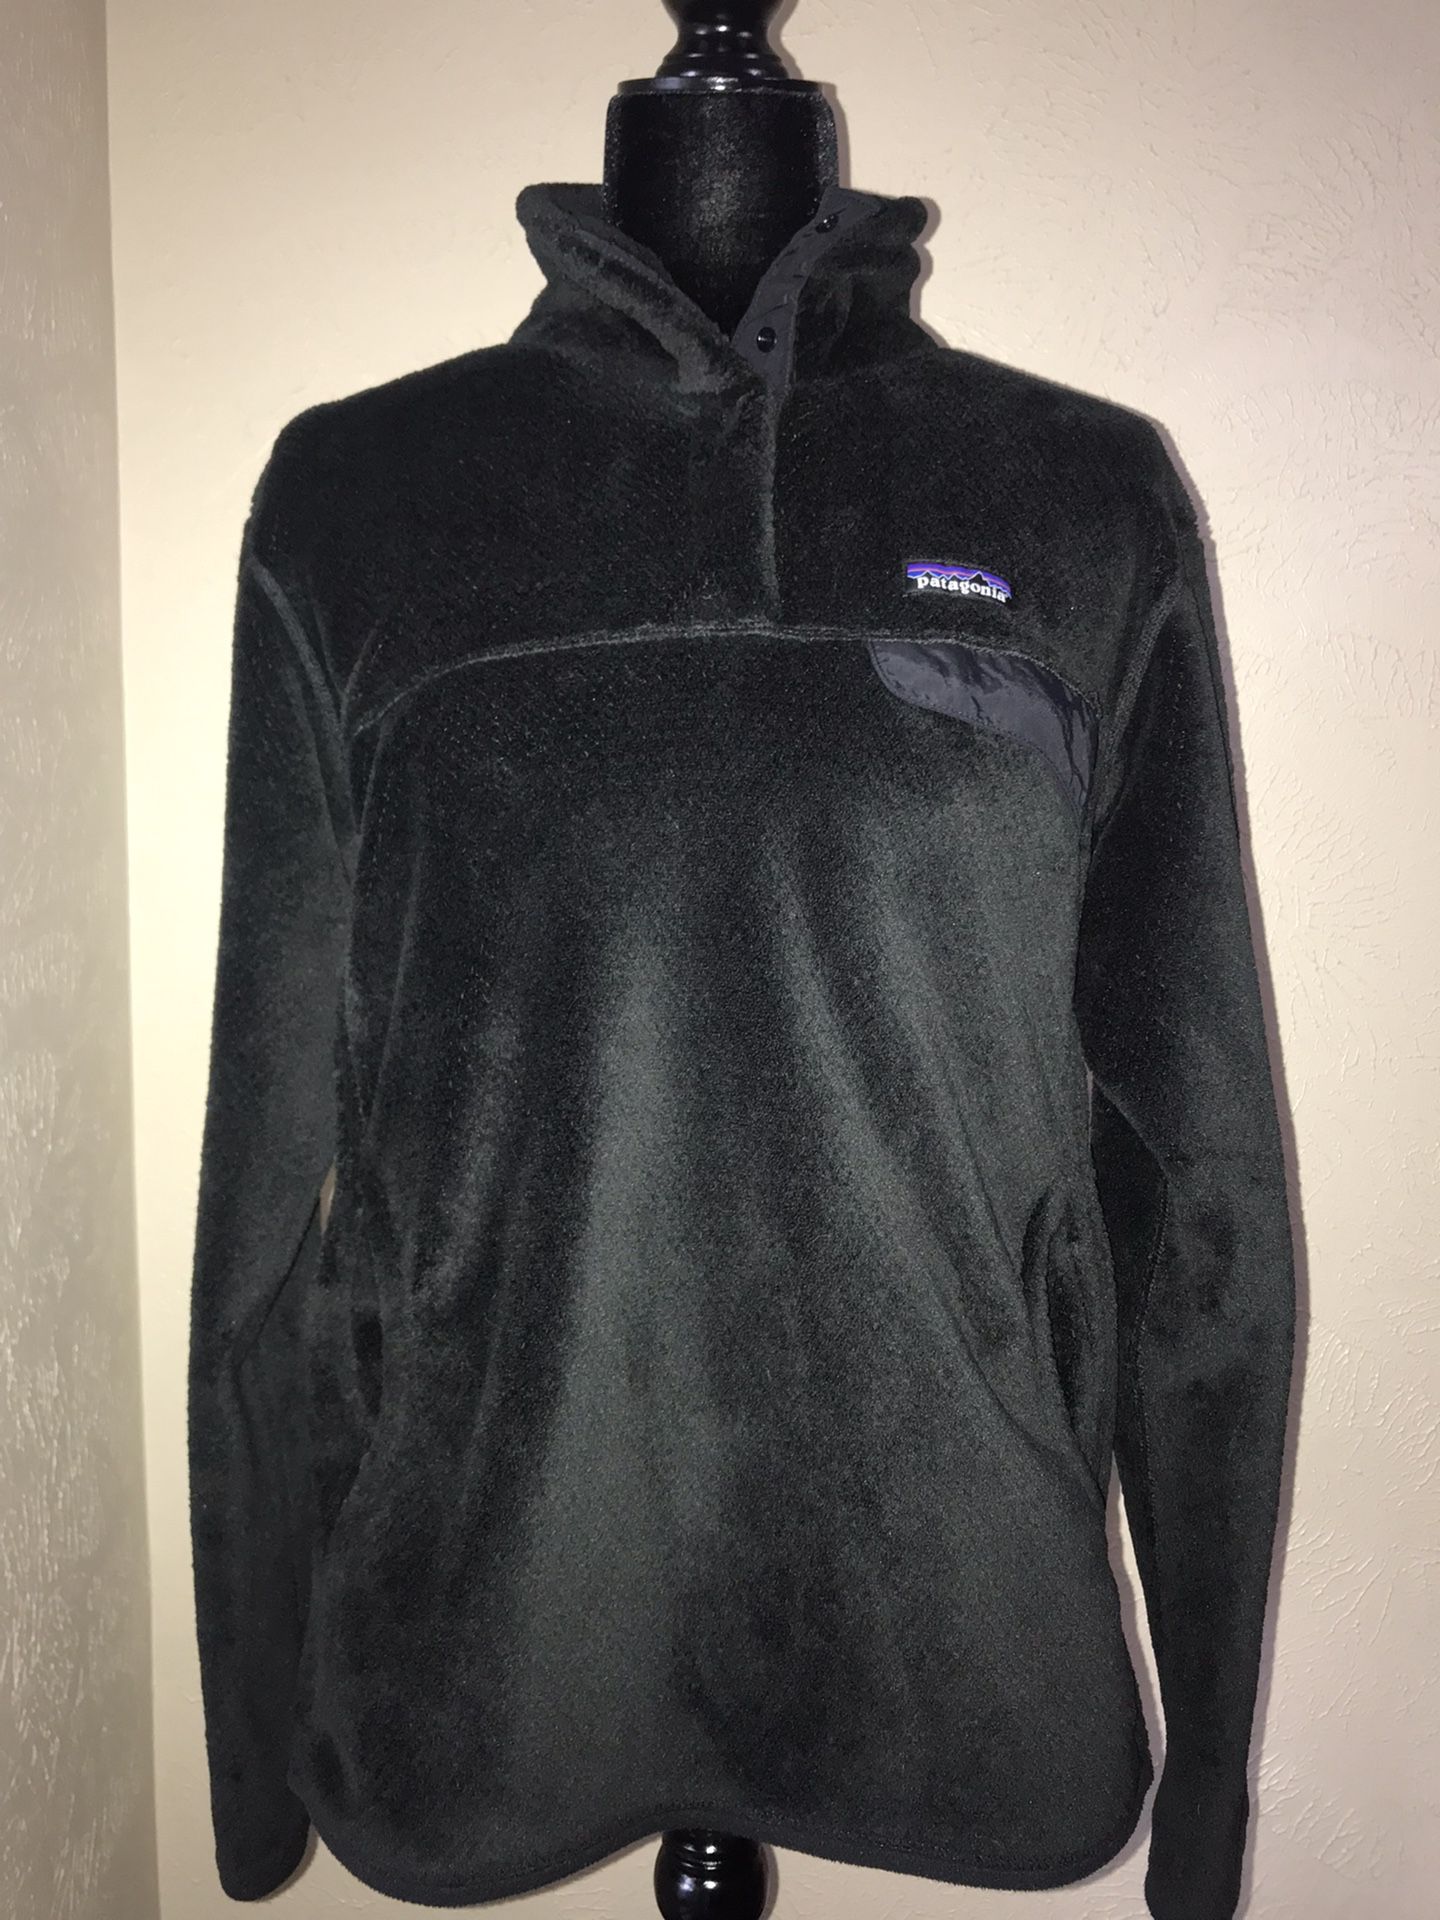 Patagonia Women’s Fleece Pullover Size L